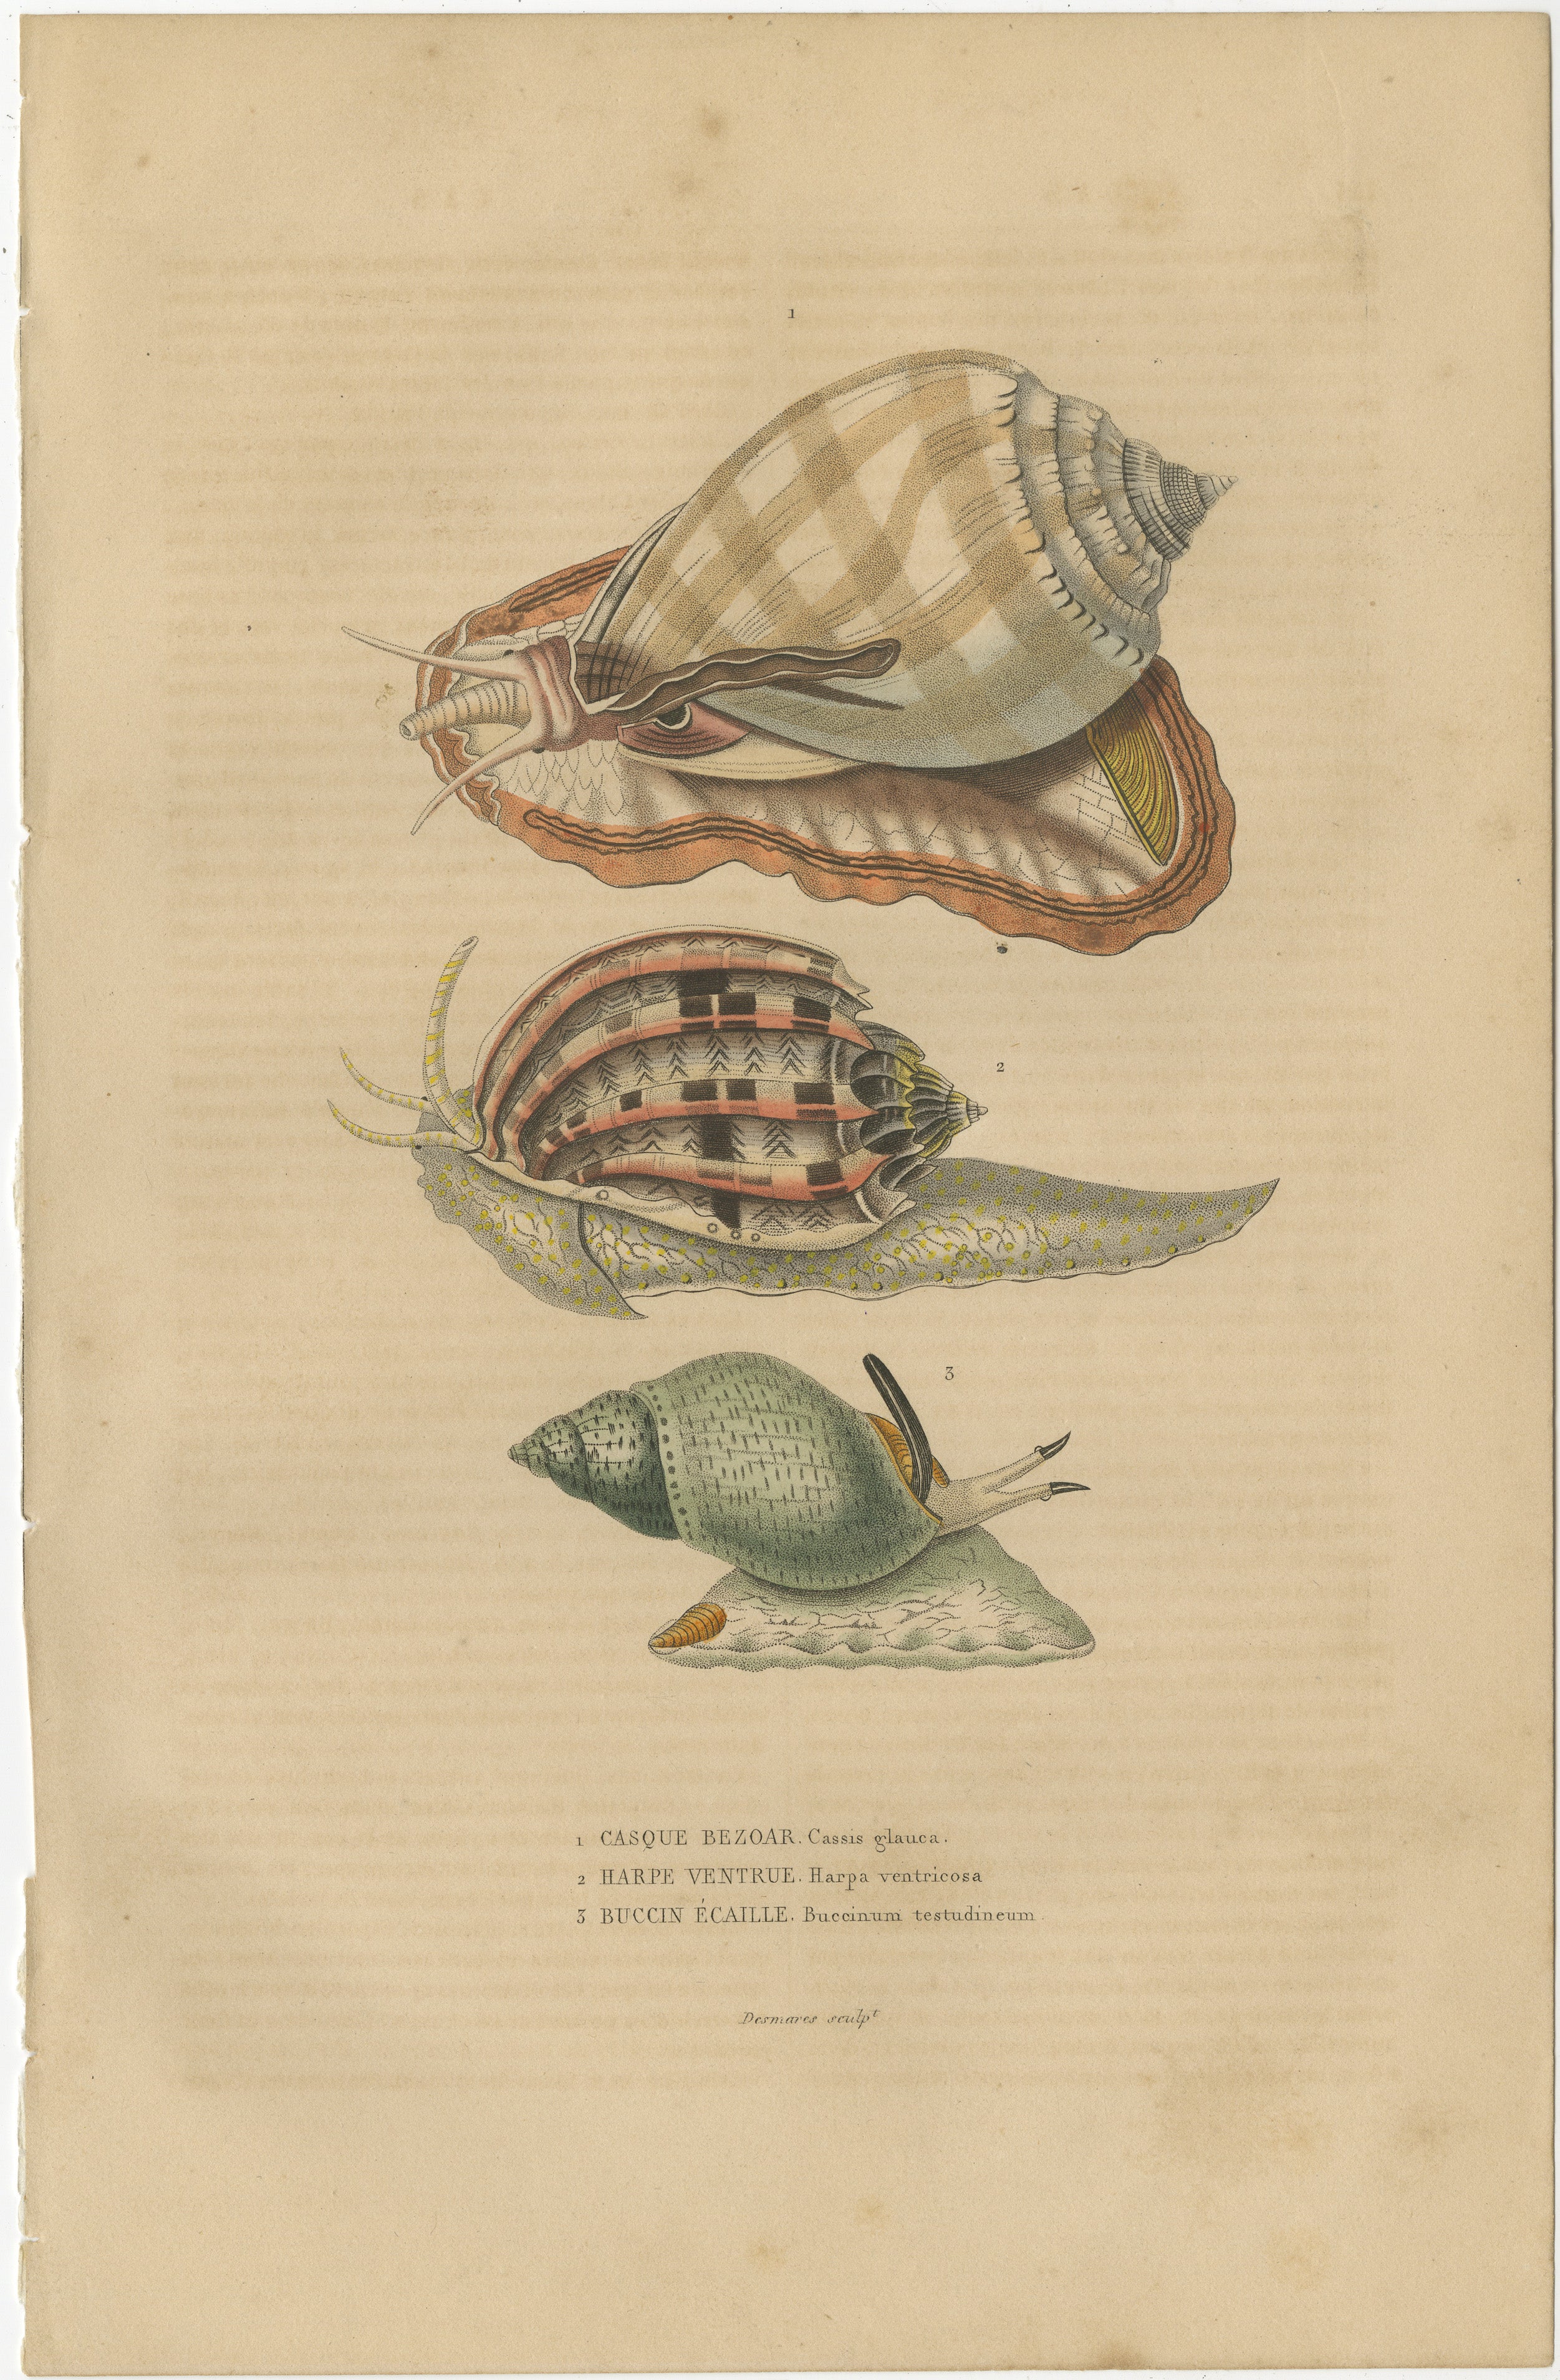 This print from Pierre Auguste Joseph Drapiez's 'Dictionnaire Classique des Sciences Naturelles' illustrates three types of sea snails, each rendered with meticulous attention to detail:

1. **Casque Bézoard (Cassis glauca)**: This is likely a